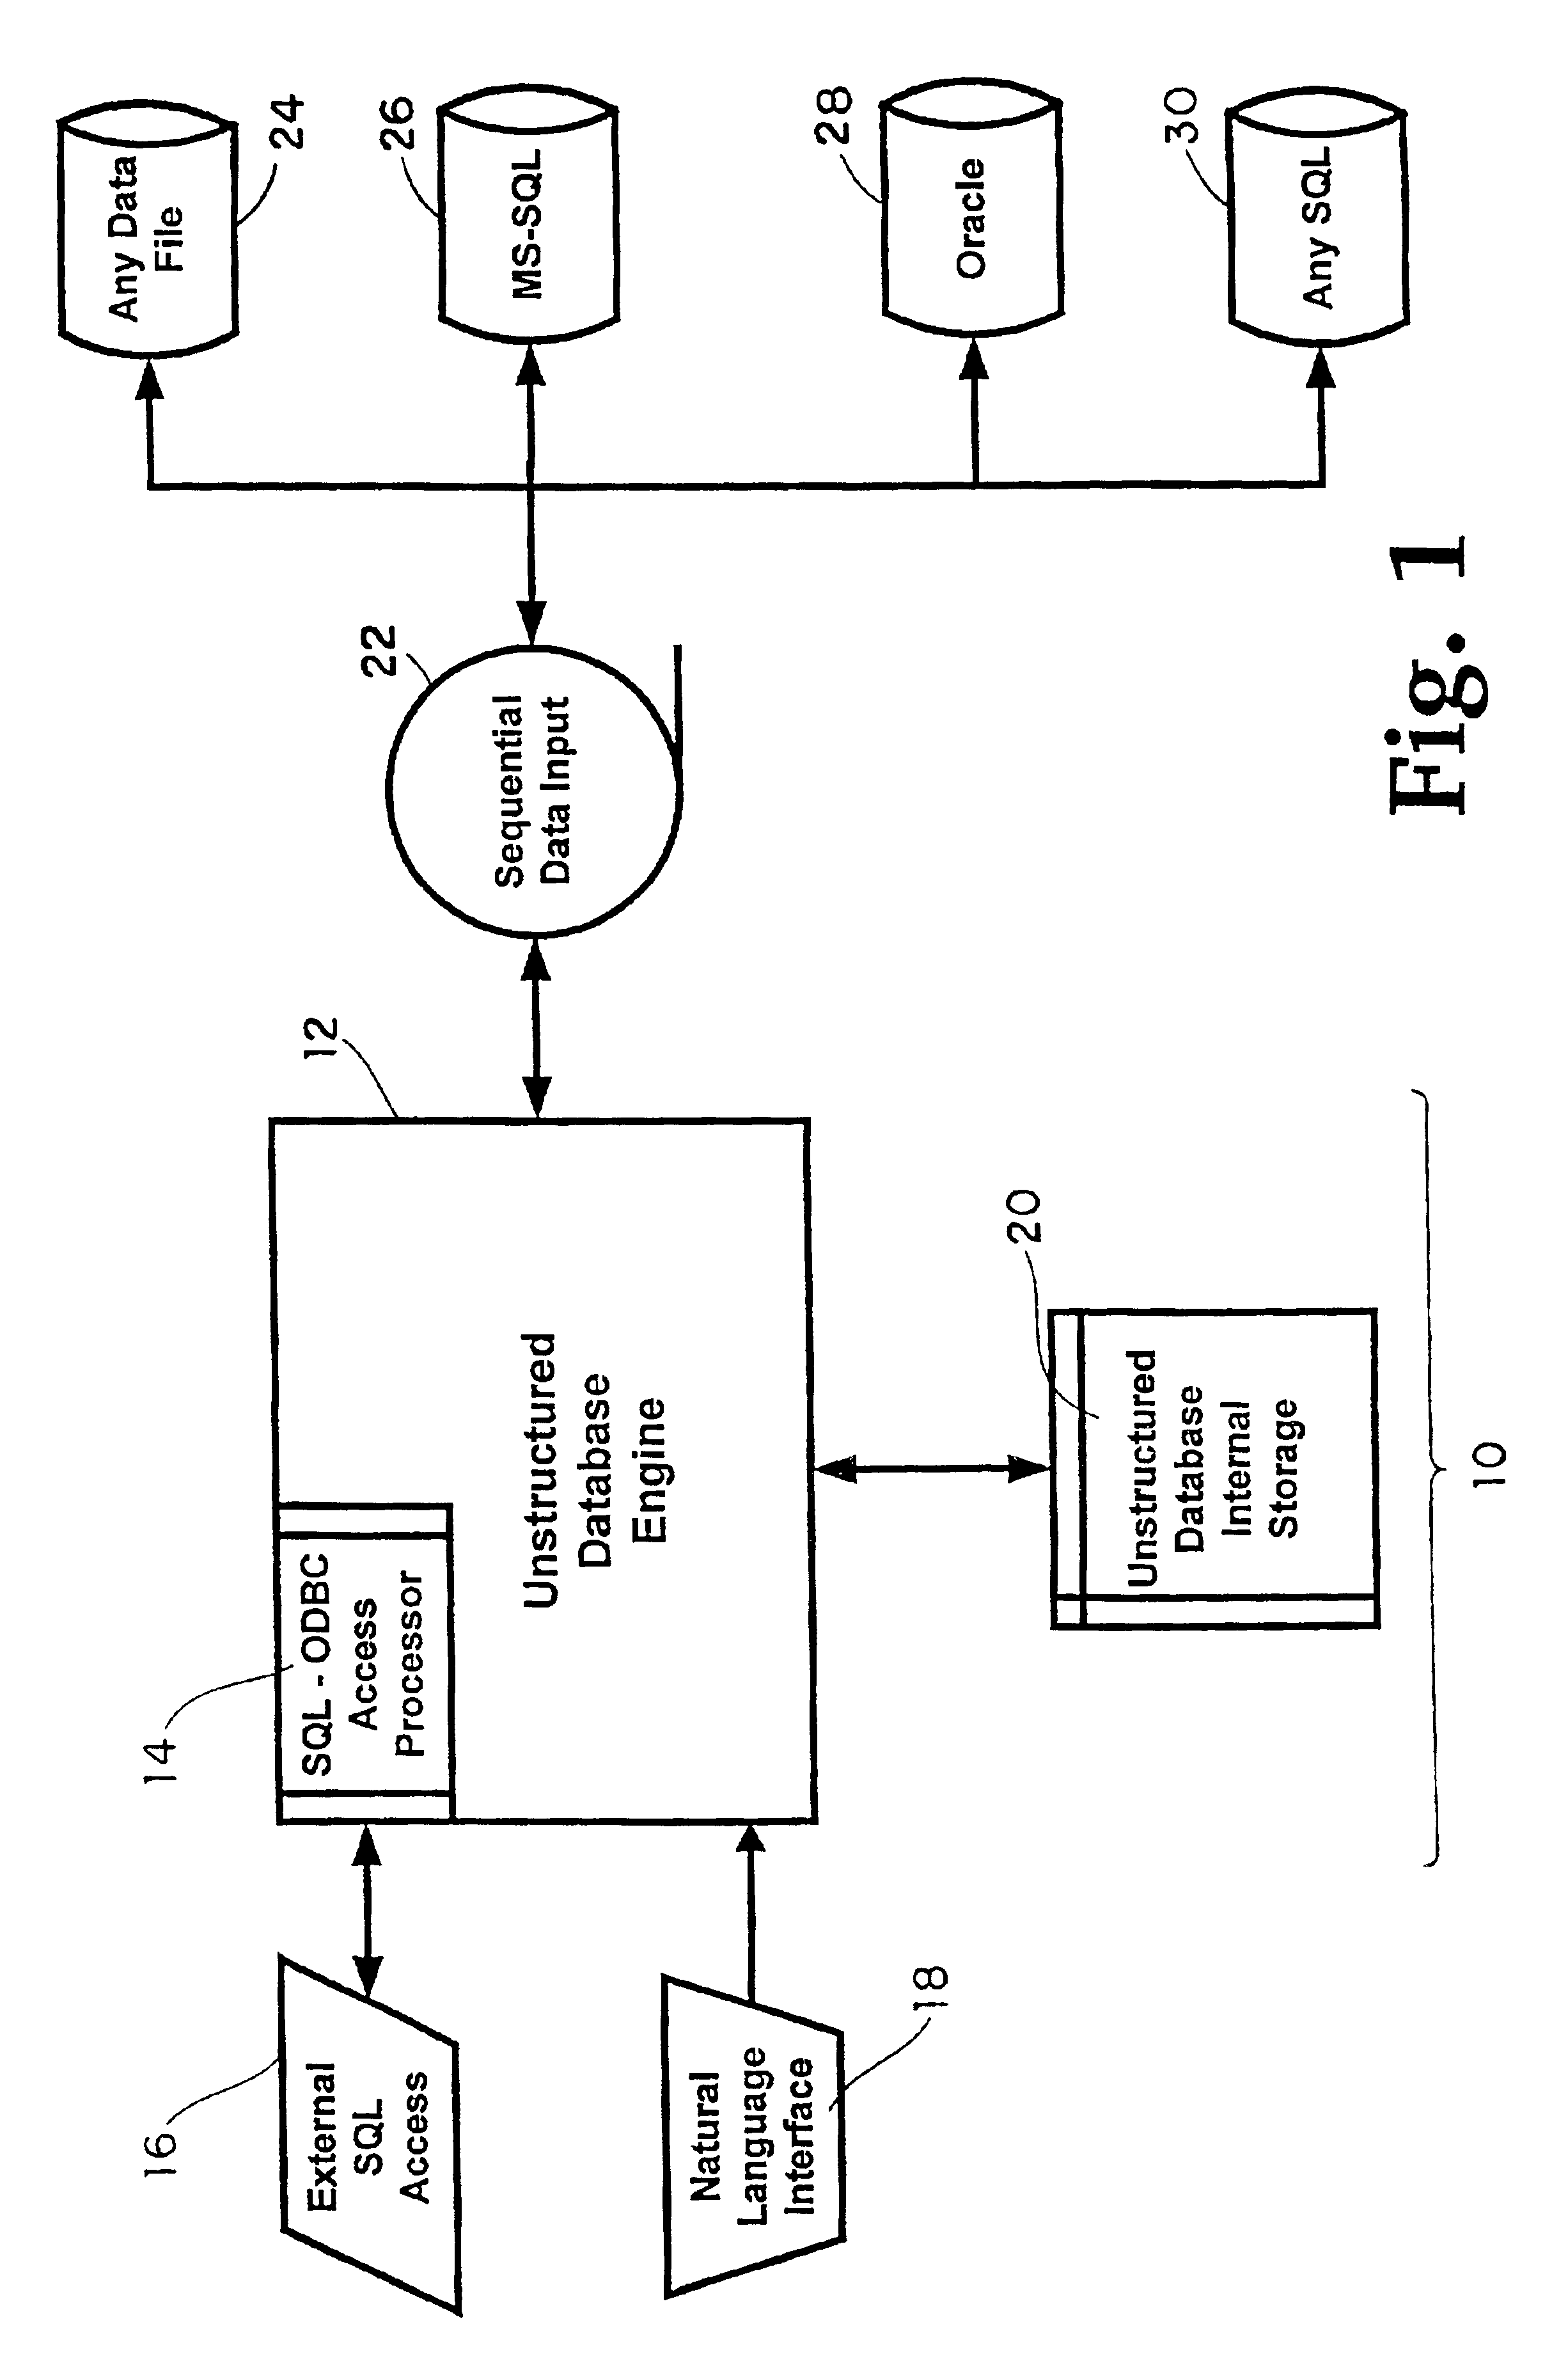 Method of storing, maintaining and distributing computer intelligible electronic data